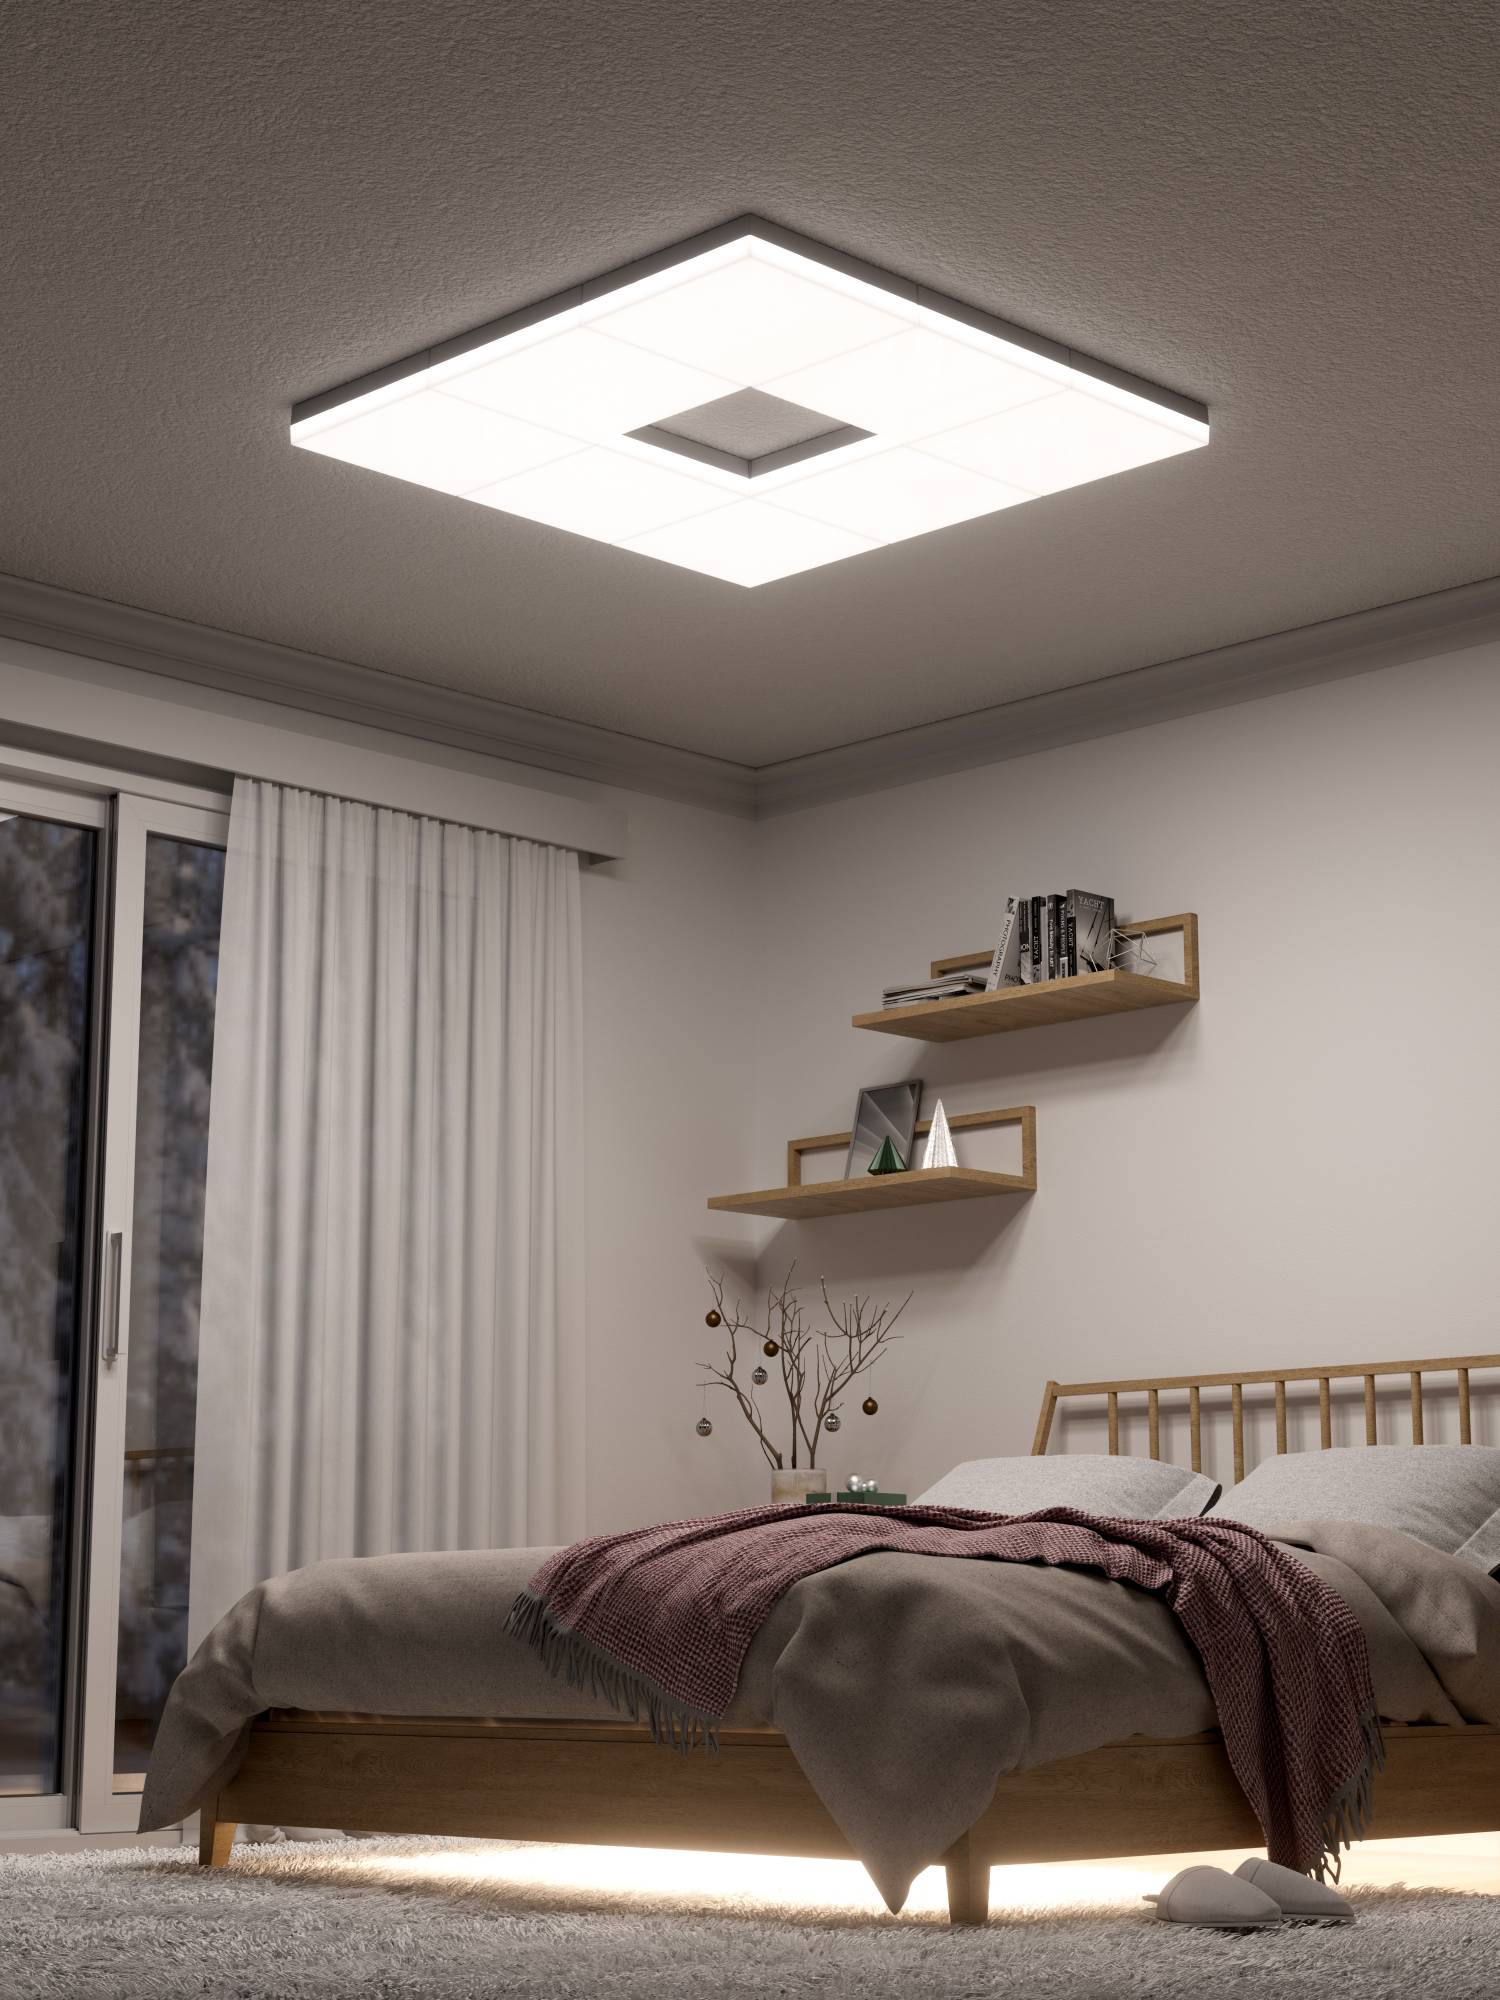 Nanoleaf Skylight Pre-Orders Open and 4 Other New Lighting Solutions Announced to Transform Your Indoor and Outdoor Spaces